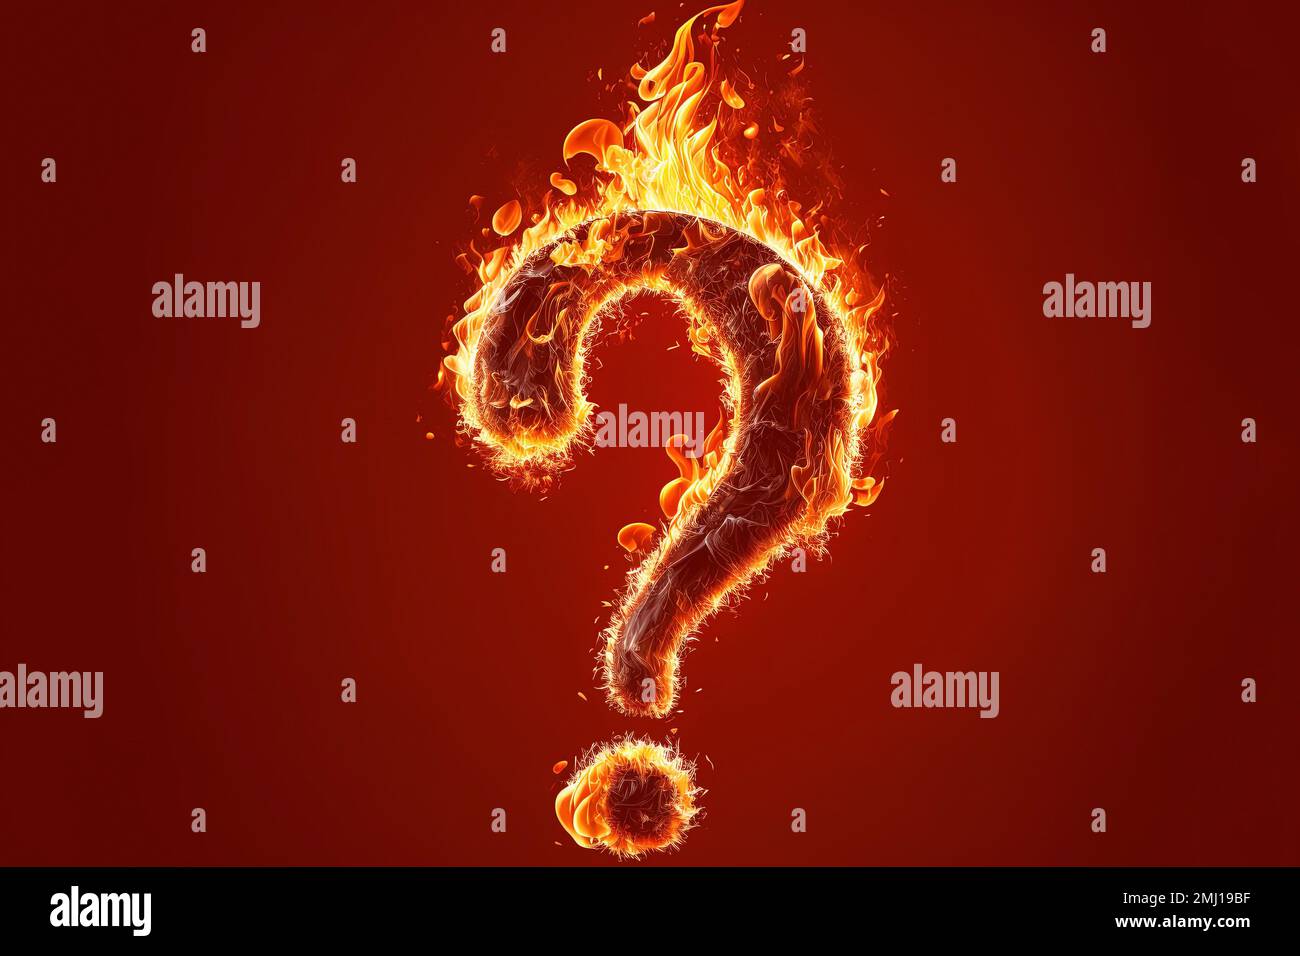 burning question mark on red background Stock Photo